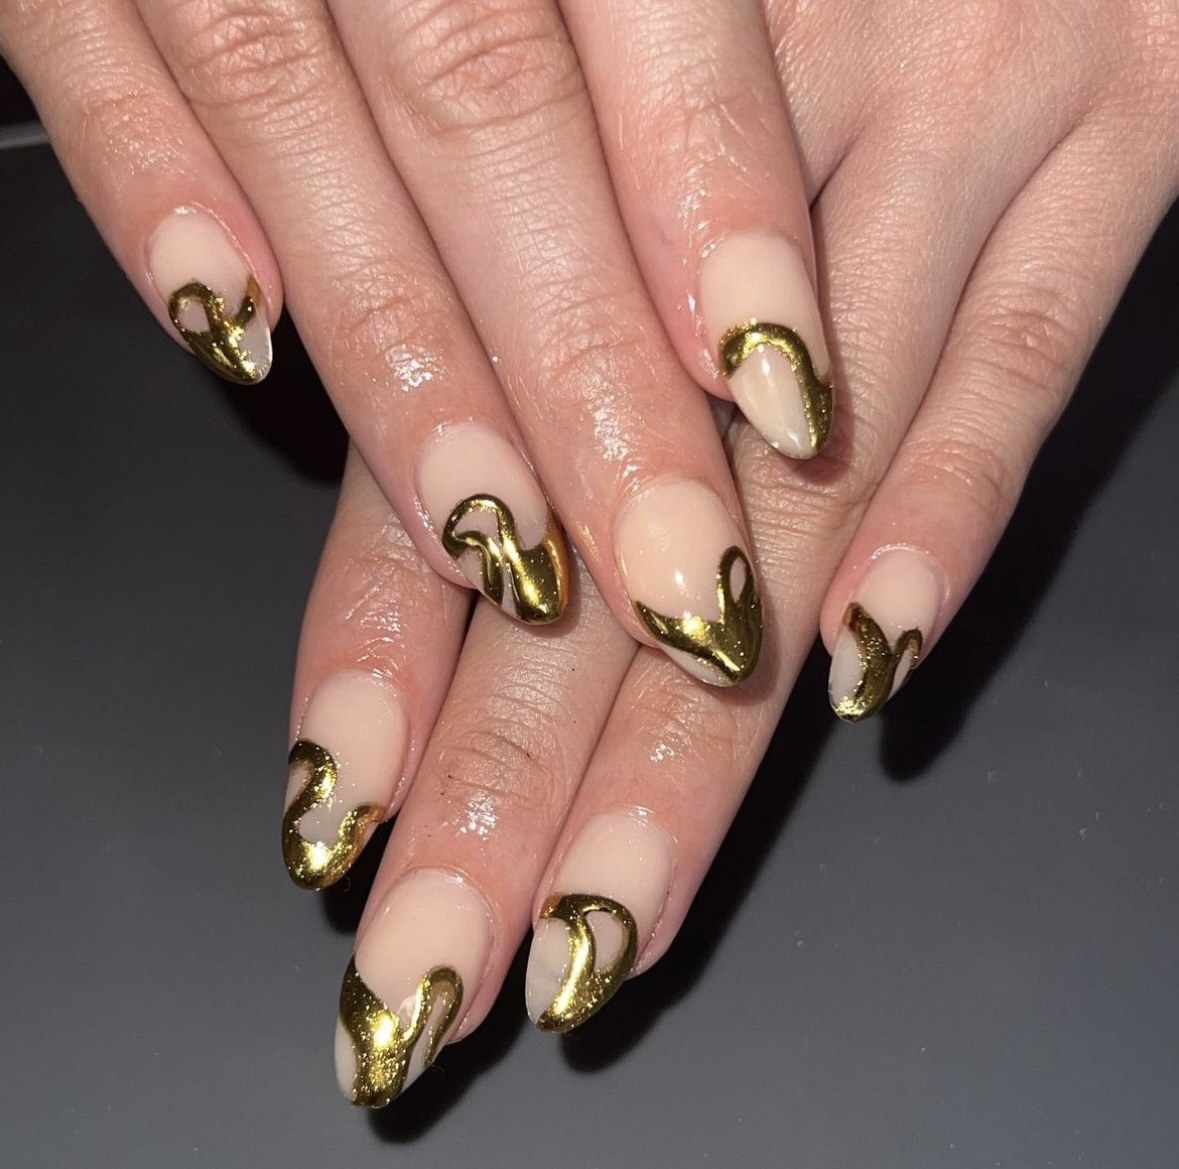 a picture of manicured nails with chrome design